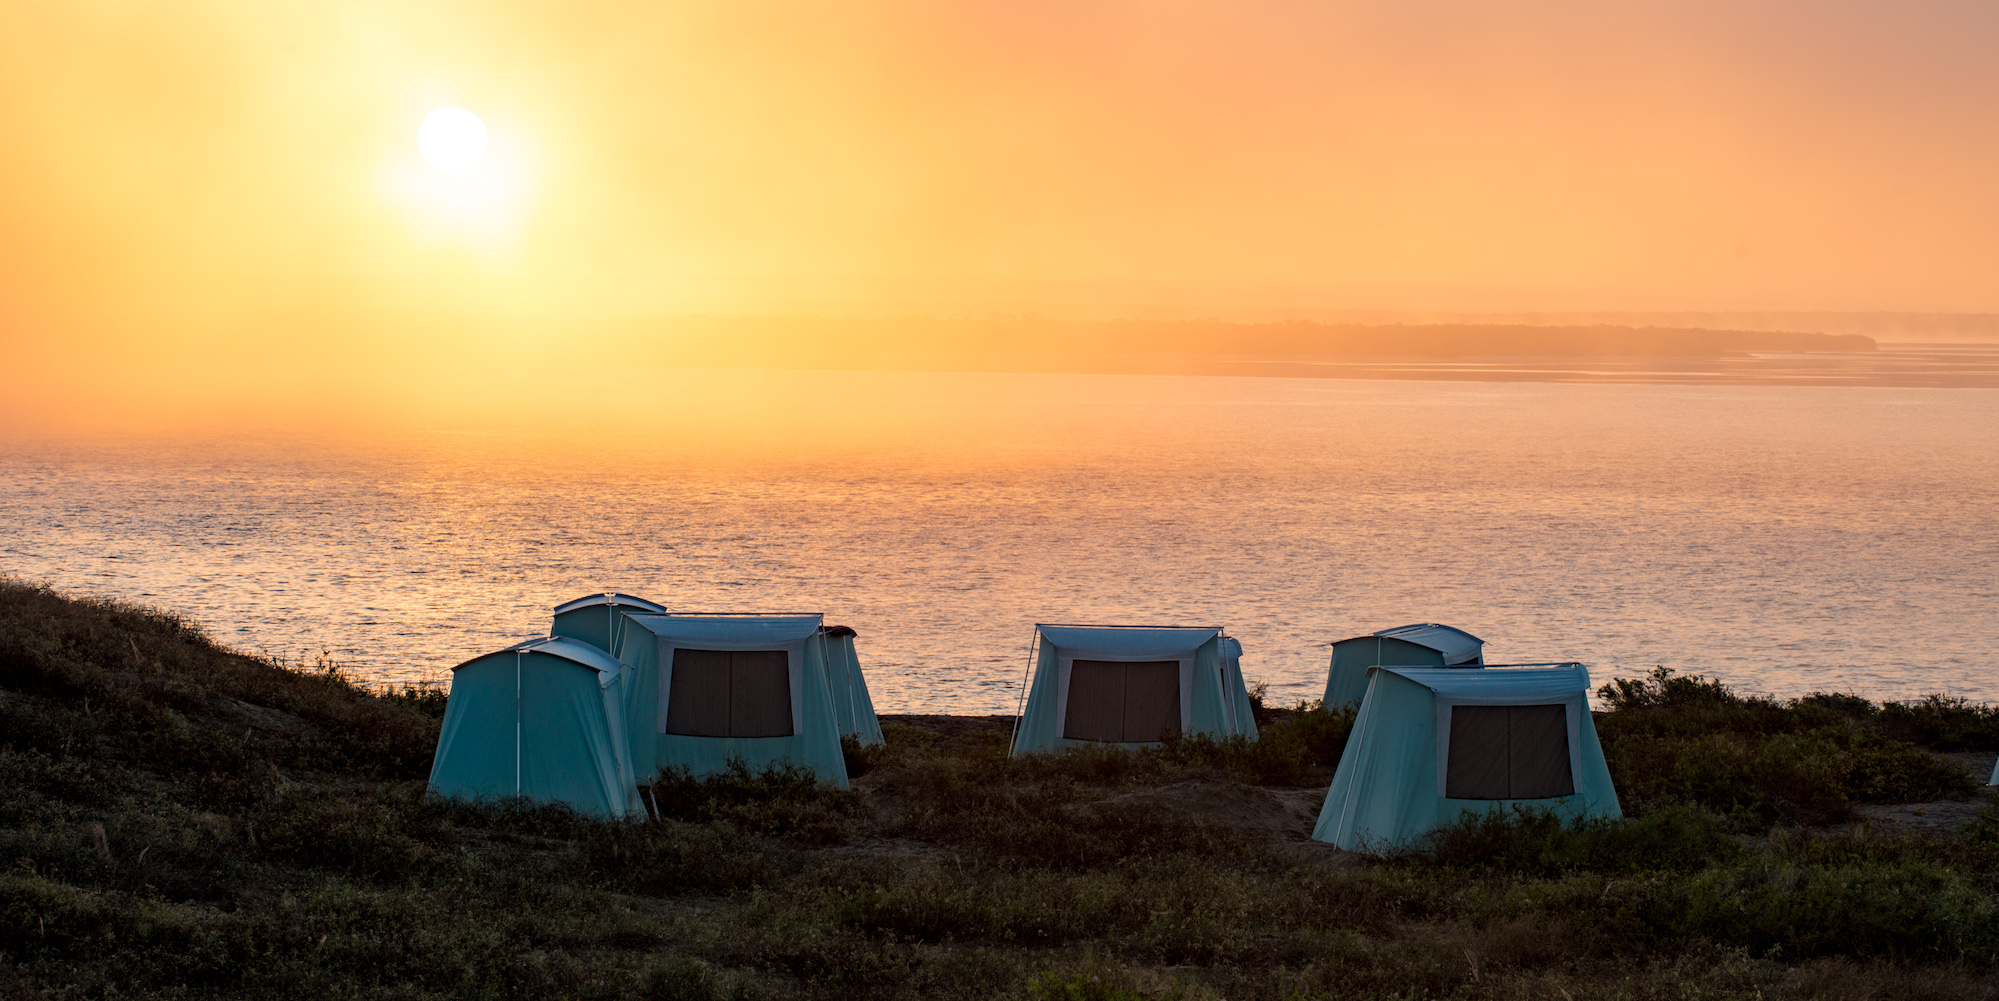 Stand up canvas tents along the Pacific Ocean in Baja California Sur